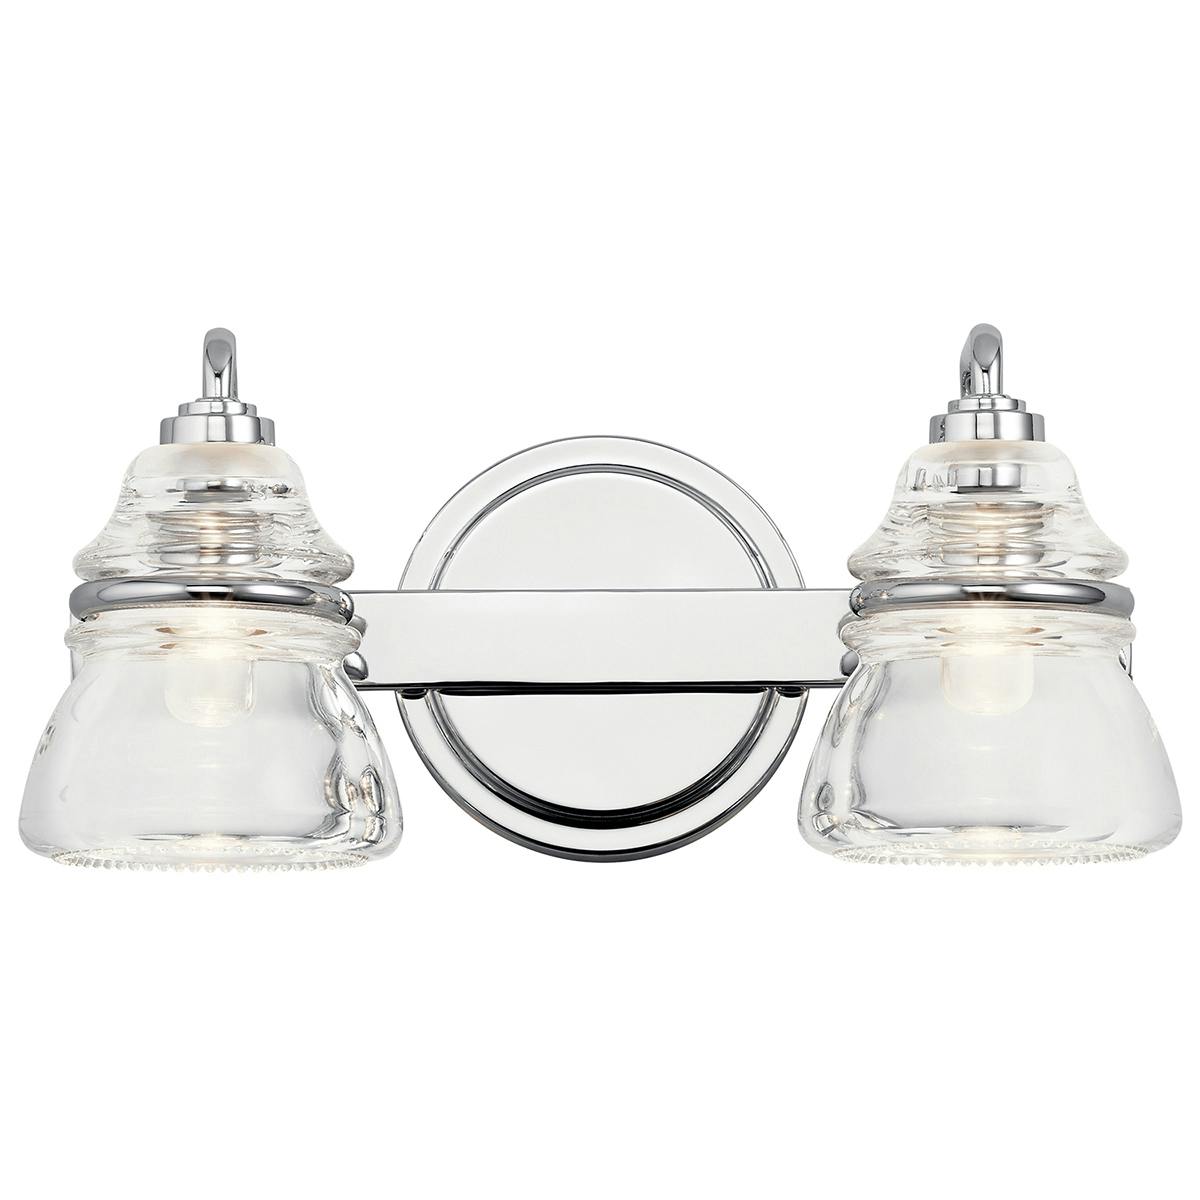 Front view of the Talland 2 Light Vanity Light Chrome on a white background